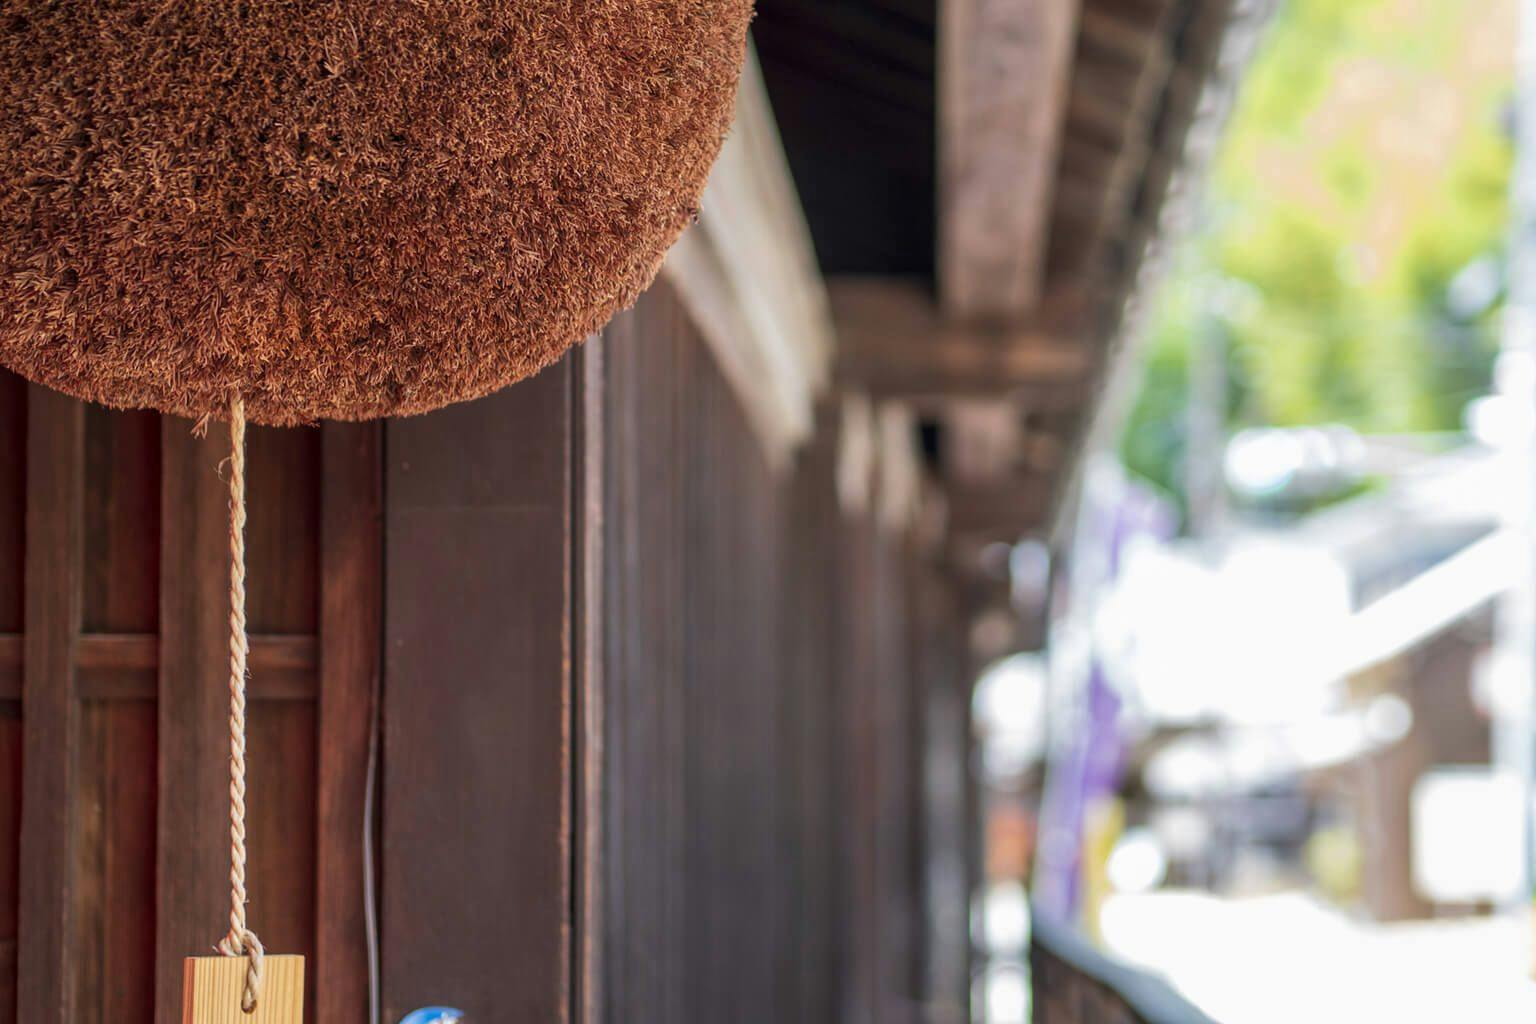 Breweries hang a “sugidama” (cedar ball) outside their buildings to indicate the arrival of freshly pressed sake